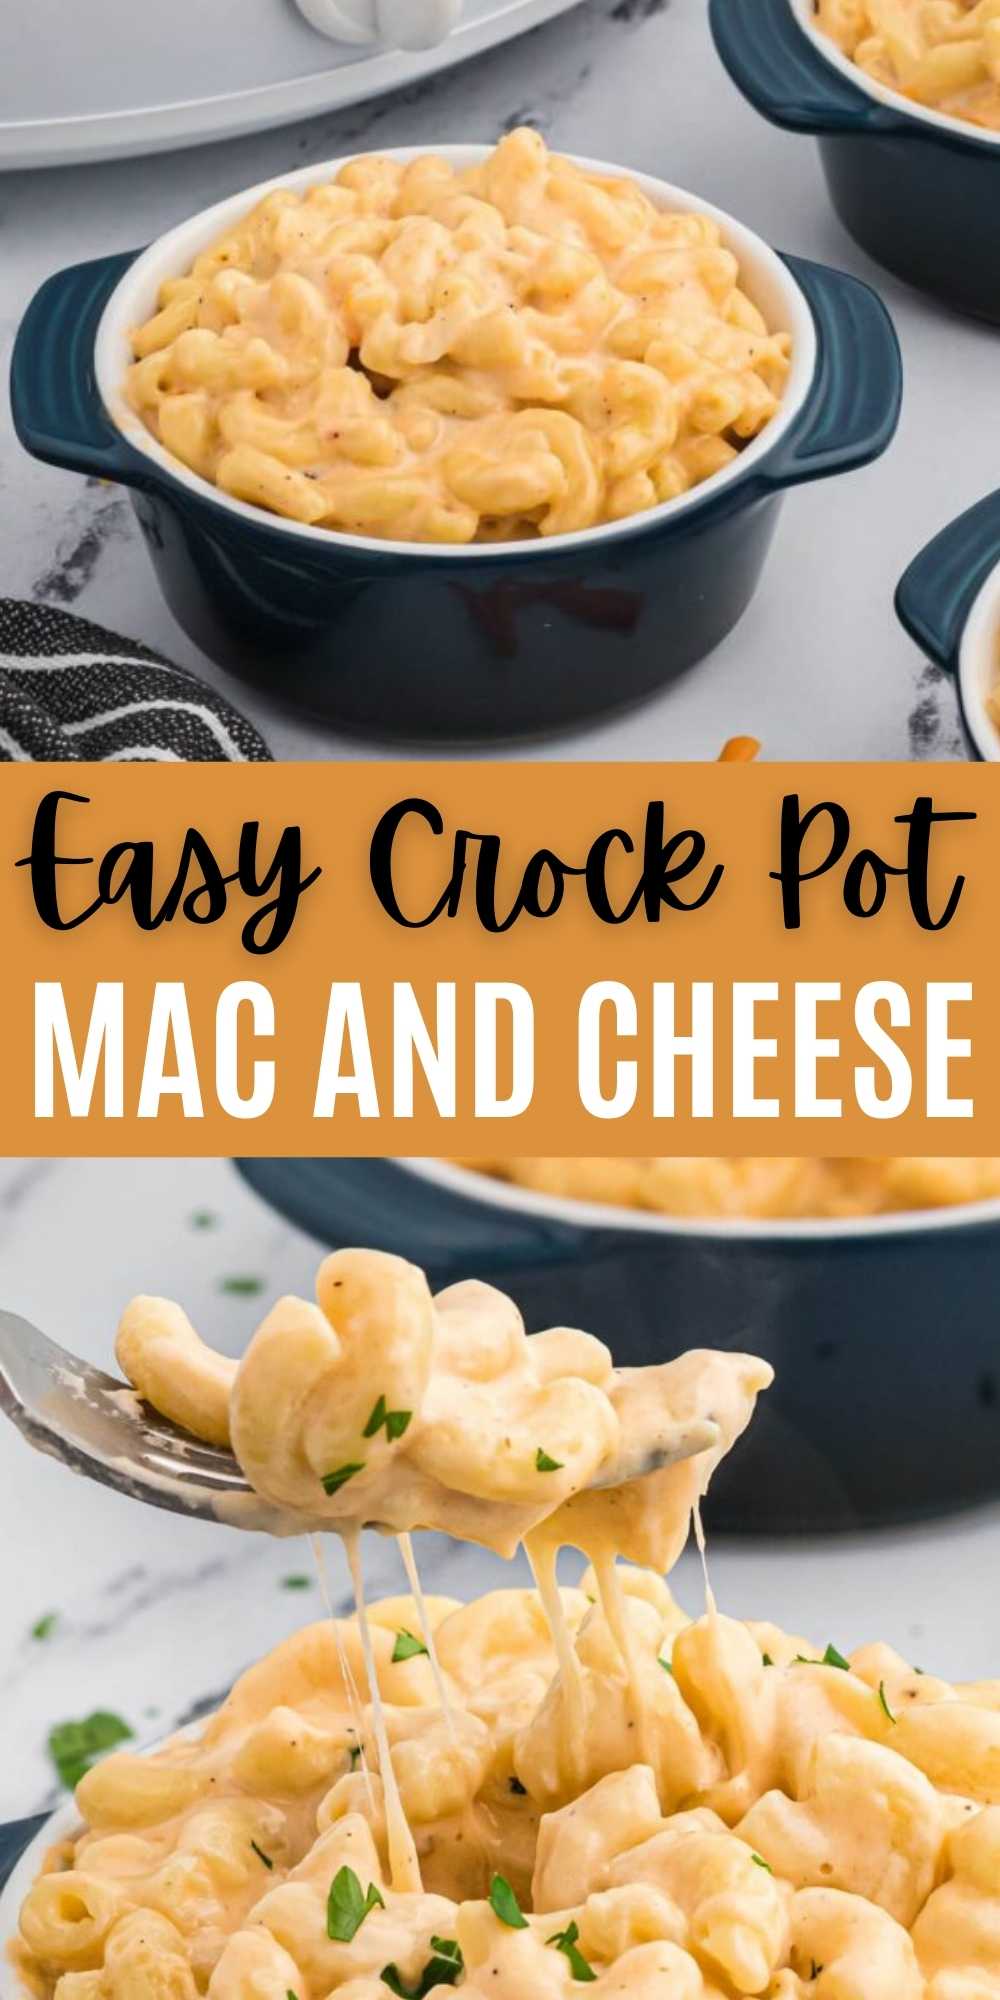 Easy Crock Pot Mac and Cheese Recipe - Butter & Baggage